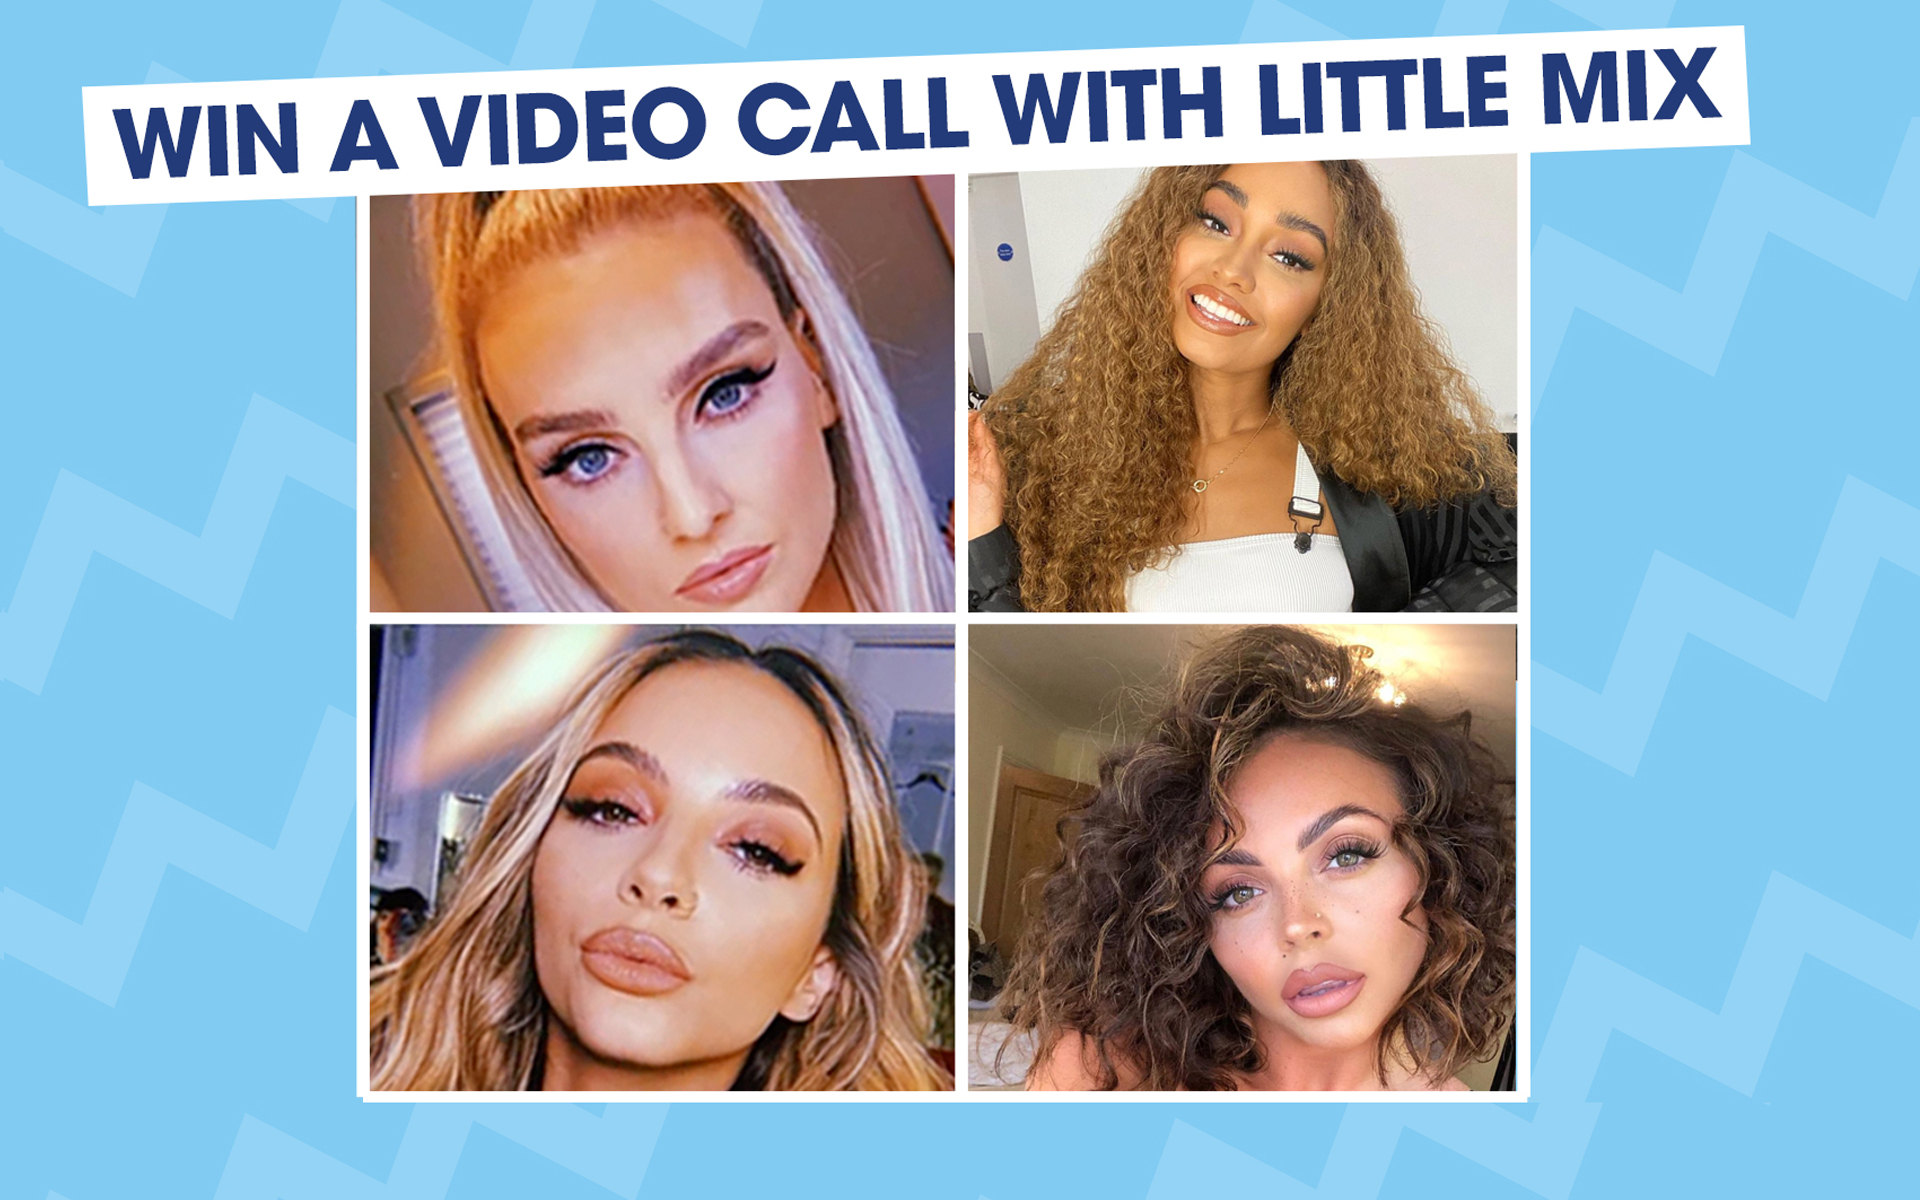 WIN a video call for you and 3 friends with Little Mix